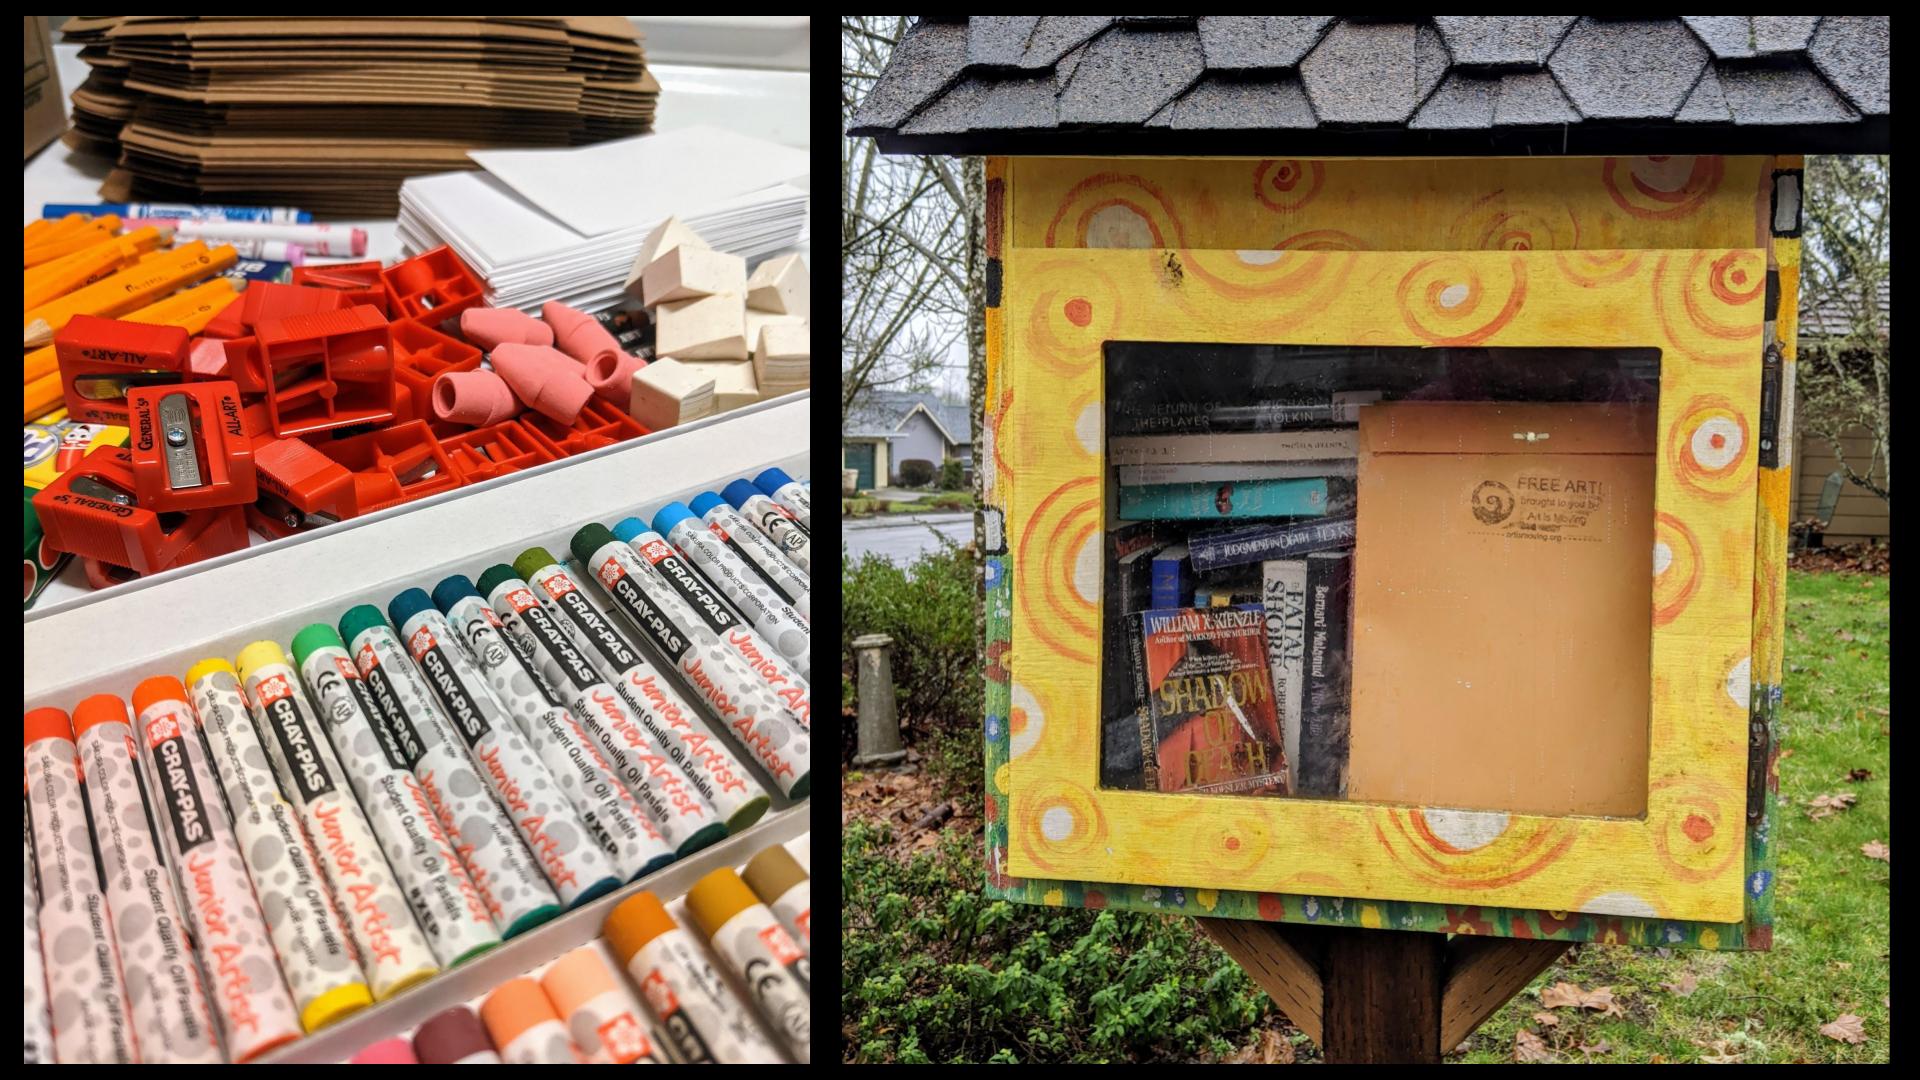 the left image is a pile of a variety of art supplies and the image on the right is a free art packet inside a little library